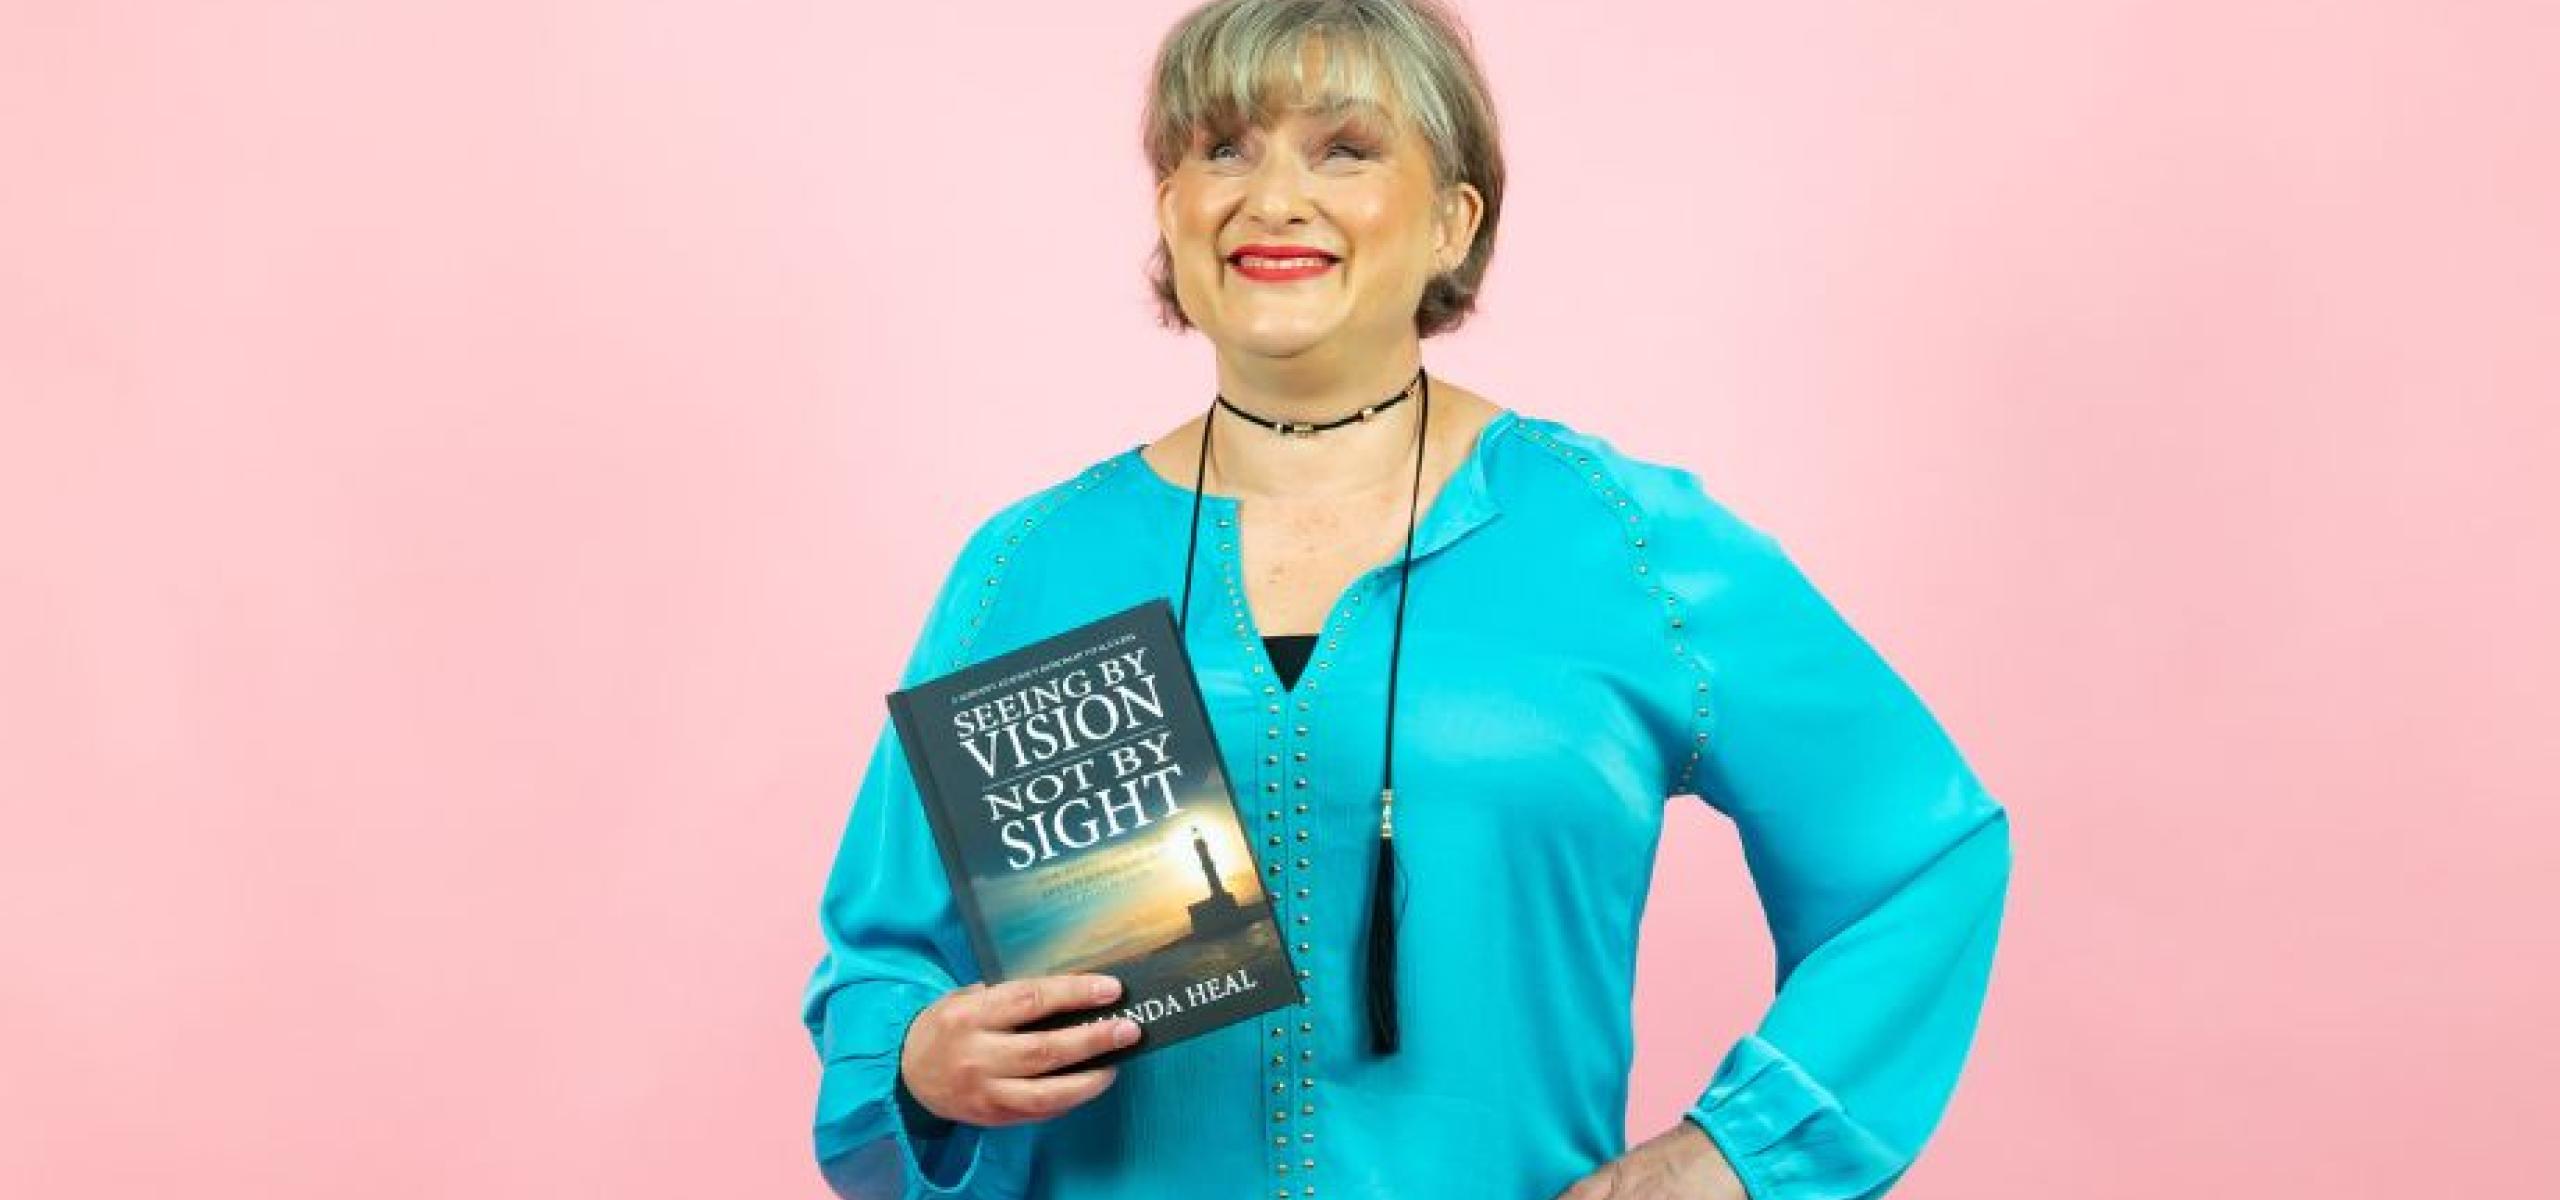 Amanda Heal poses with her book, 'Seeing by Vision Not by Sight'